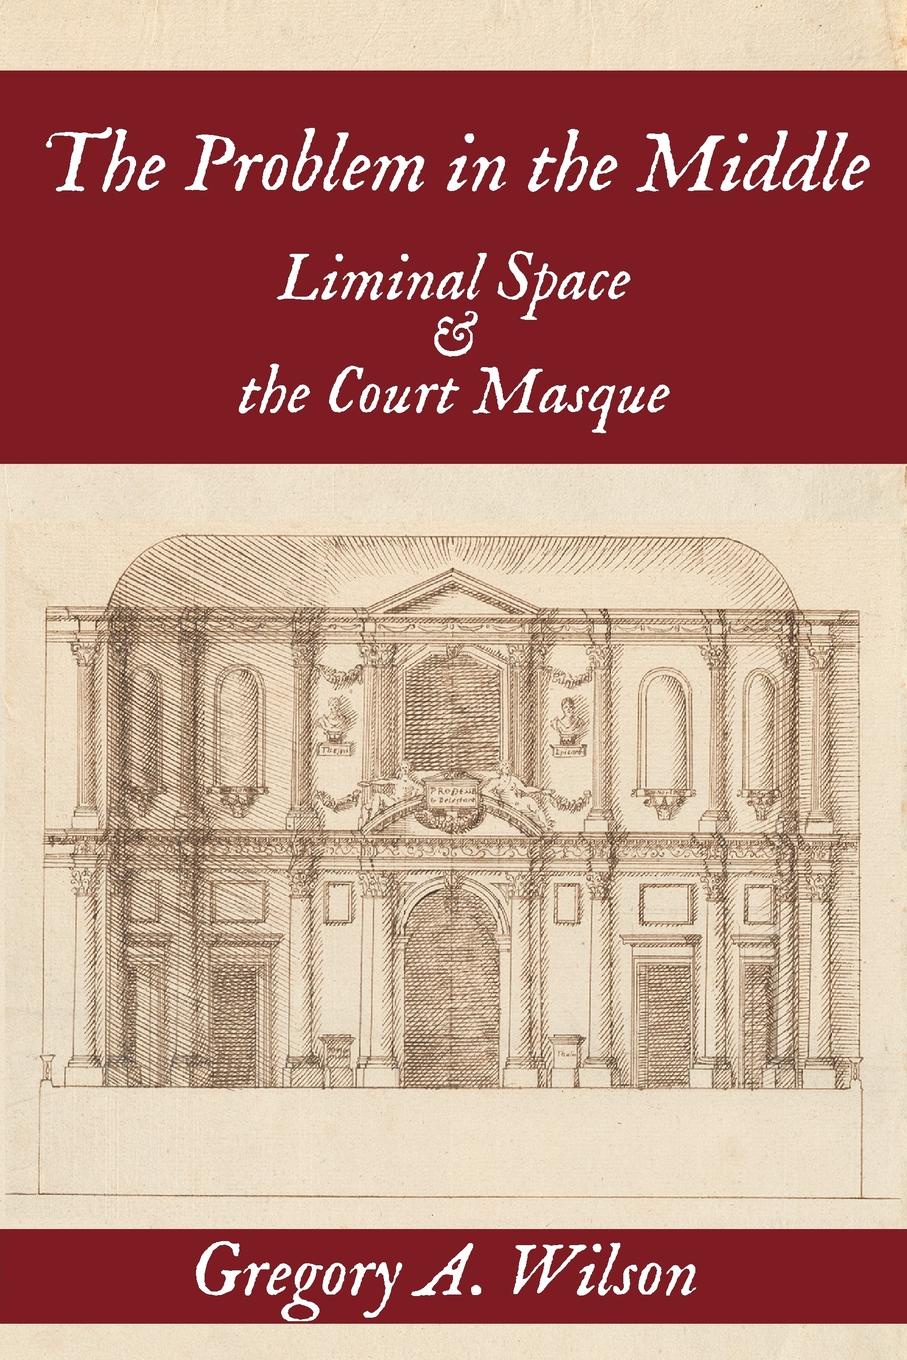 The Problem in the Middle. Liminal Space and the Court Masque